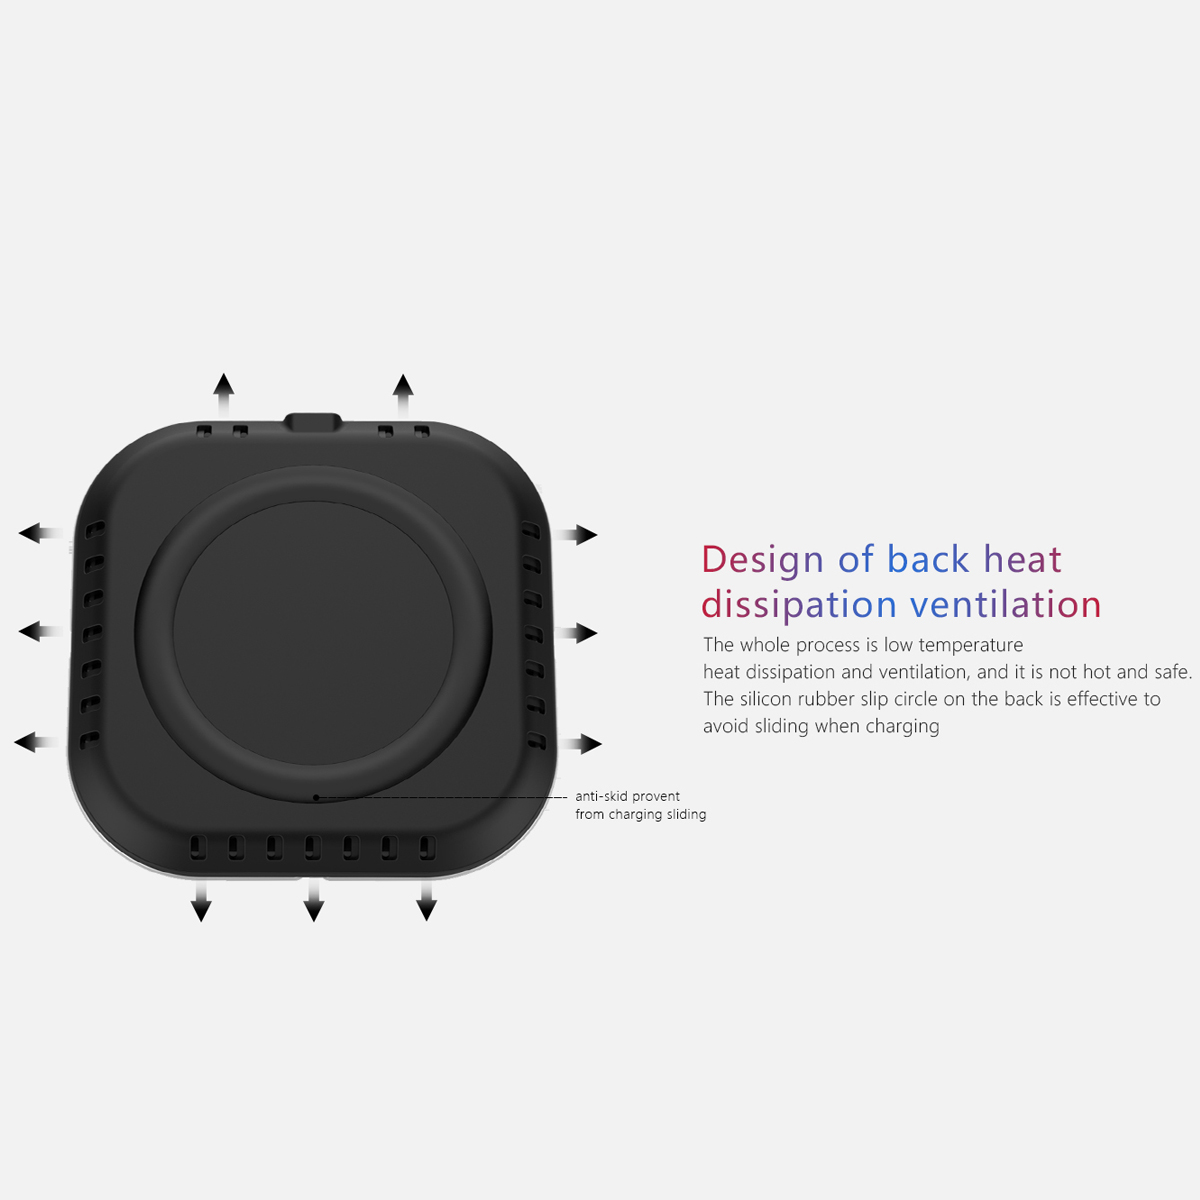 Bakeey-10W-Fast-Charging-LED-Light-Indicator-Qi-Wireless-Charger-Pad-for-iPhone-X-S8-S9-Plus-1314490-7